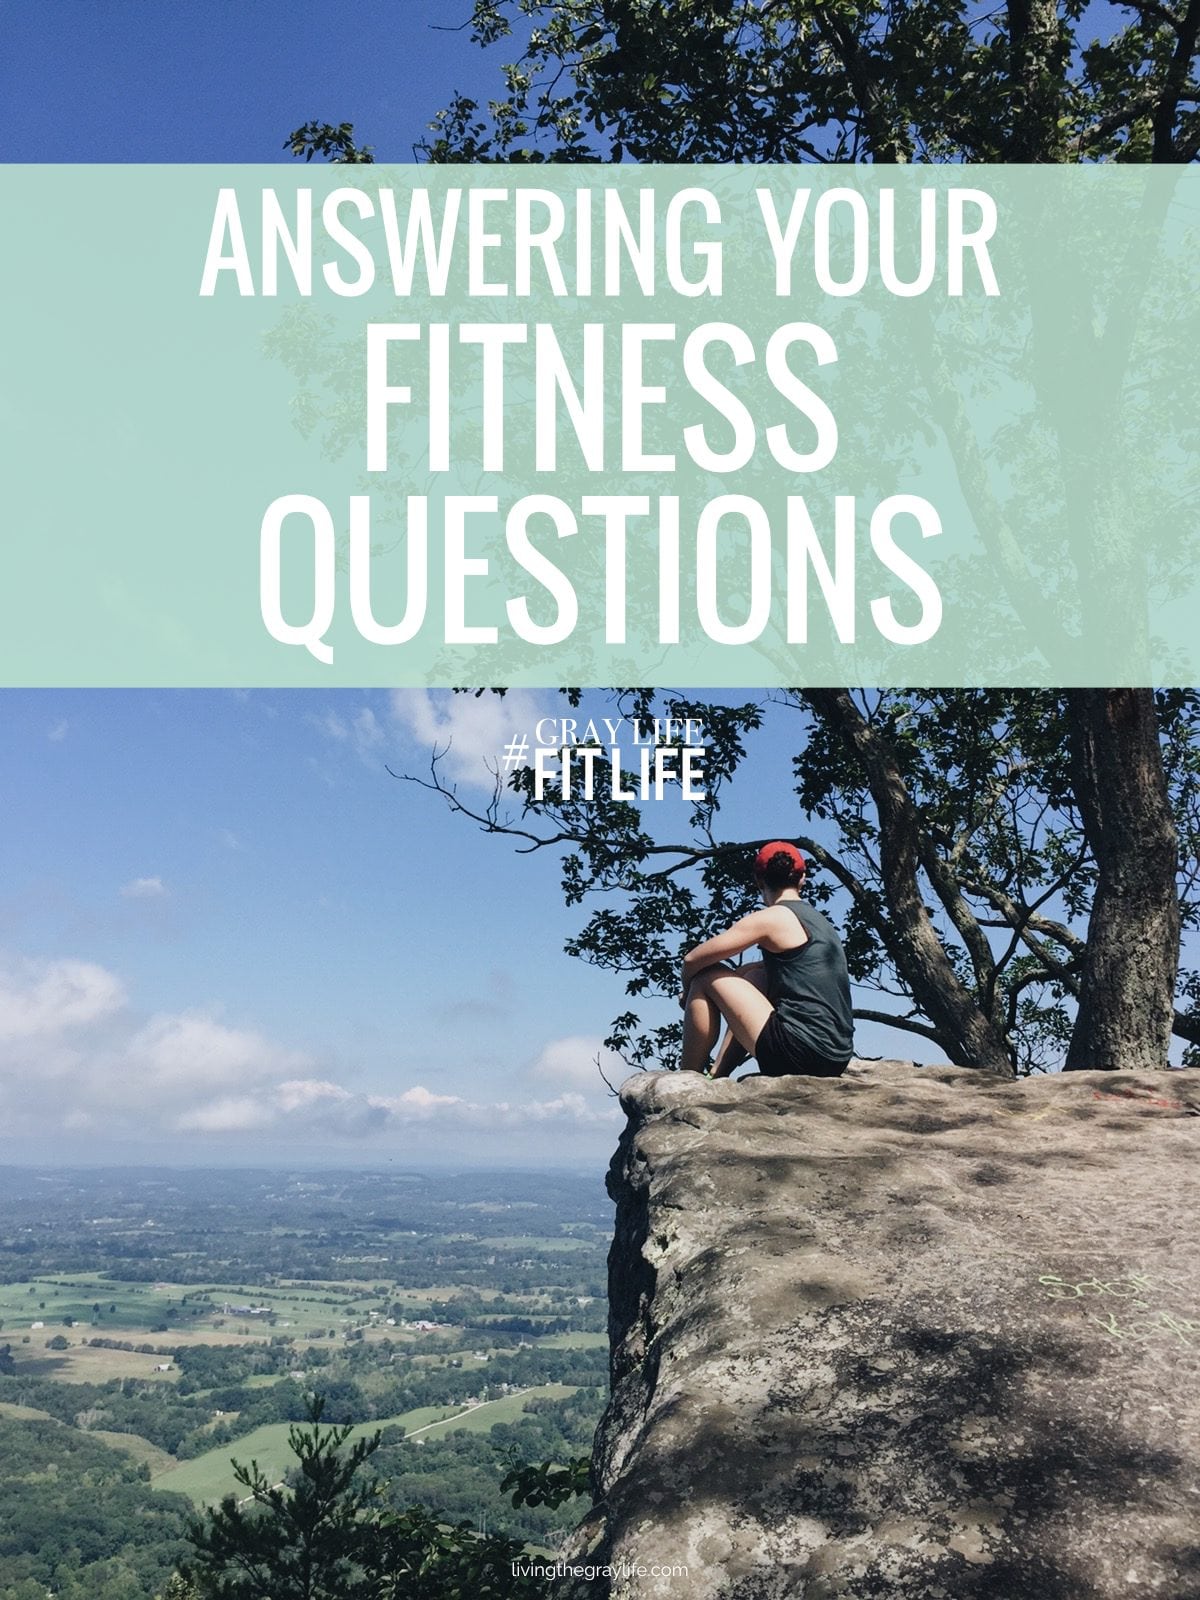 Your fitness questions answered! Everything from beginner workouts to finding time for the gym.